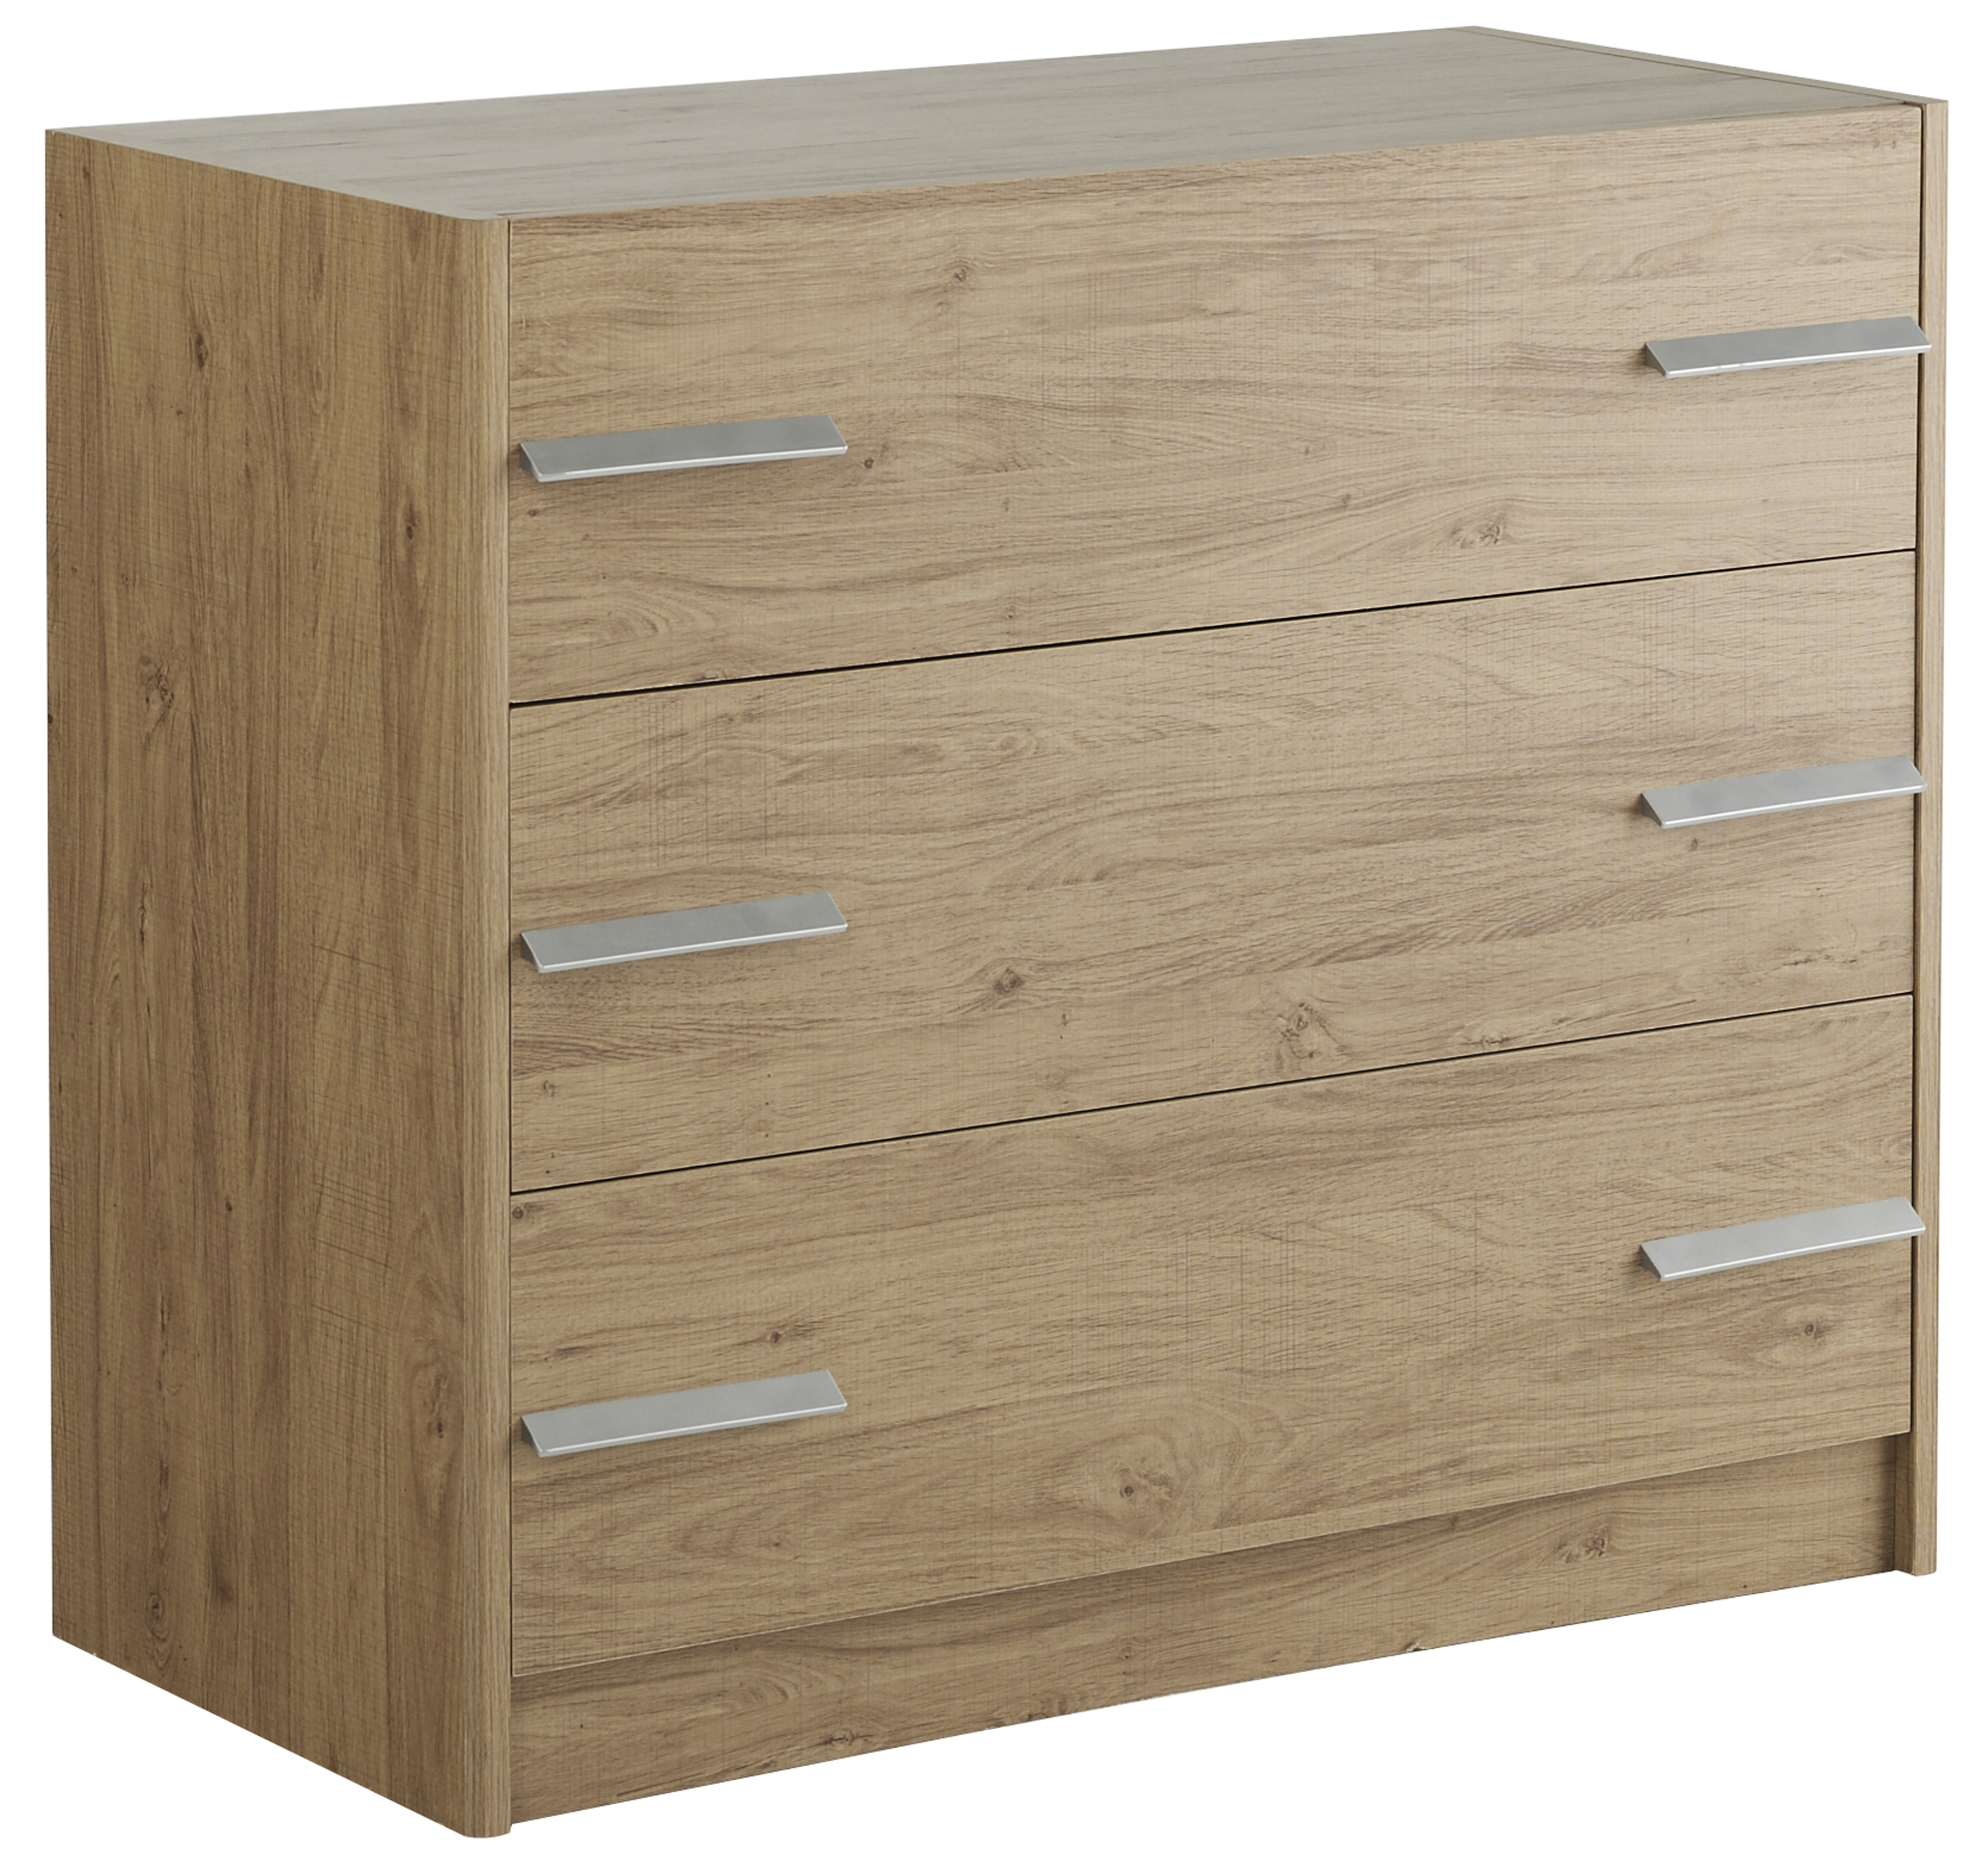 Parisot Tweed Chest Of Drawers